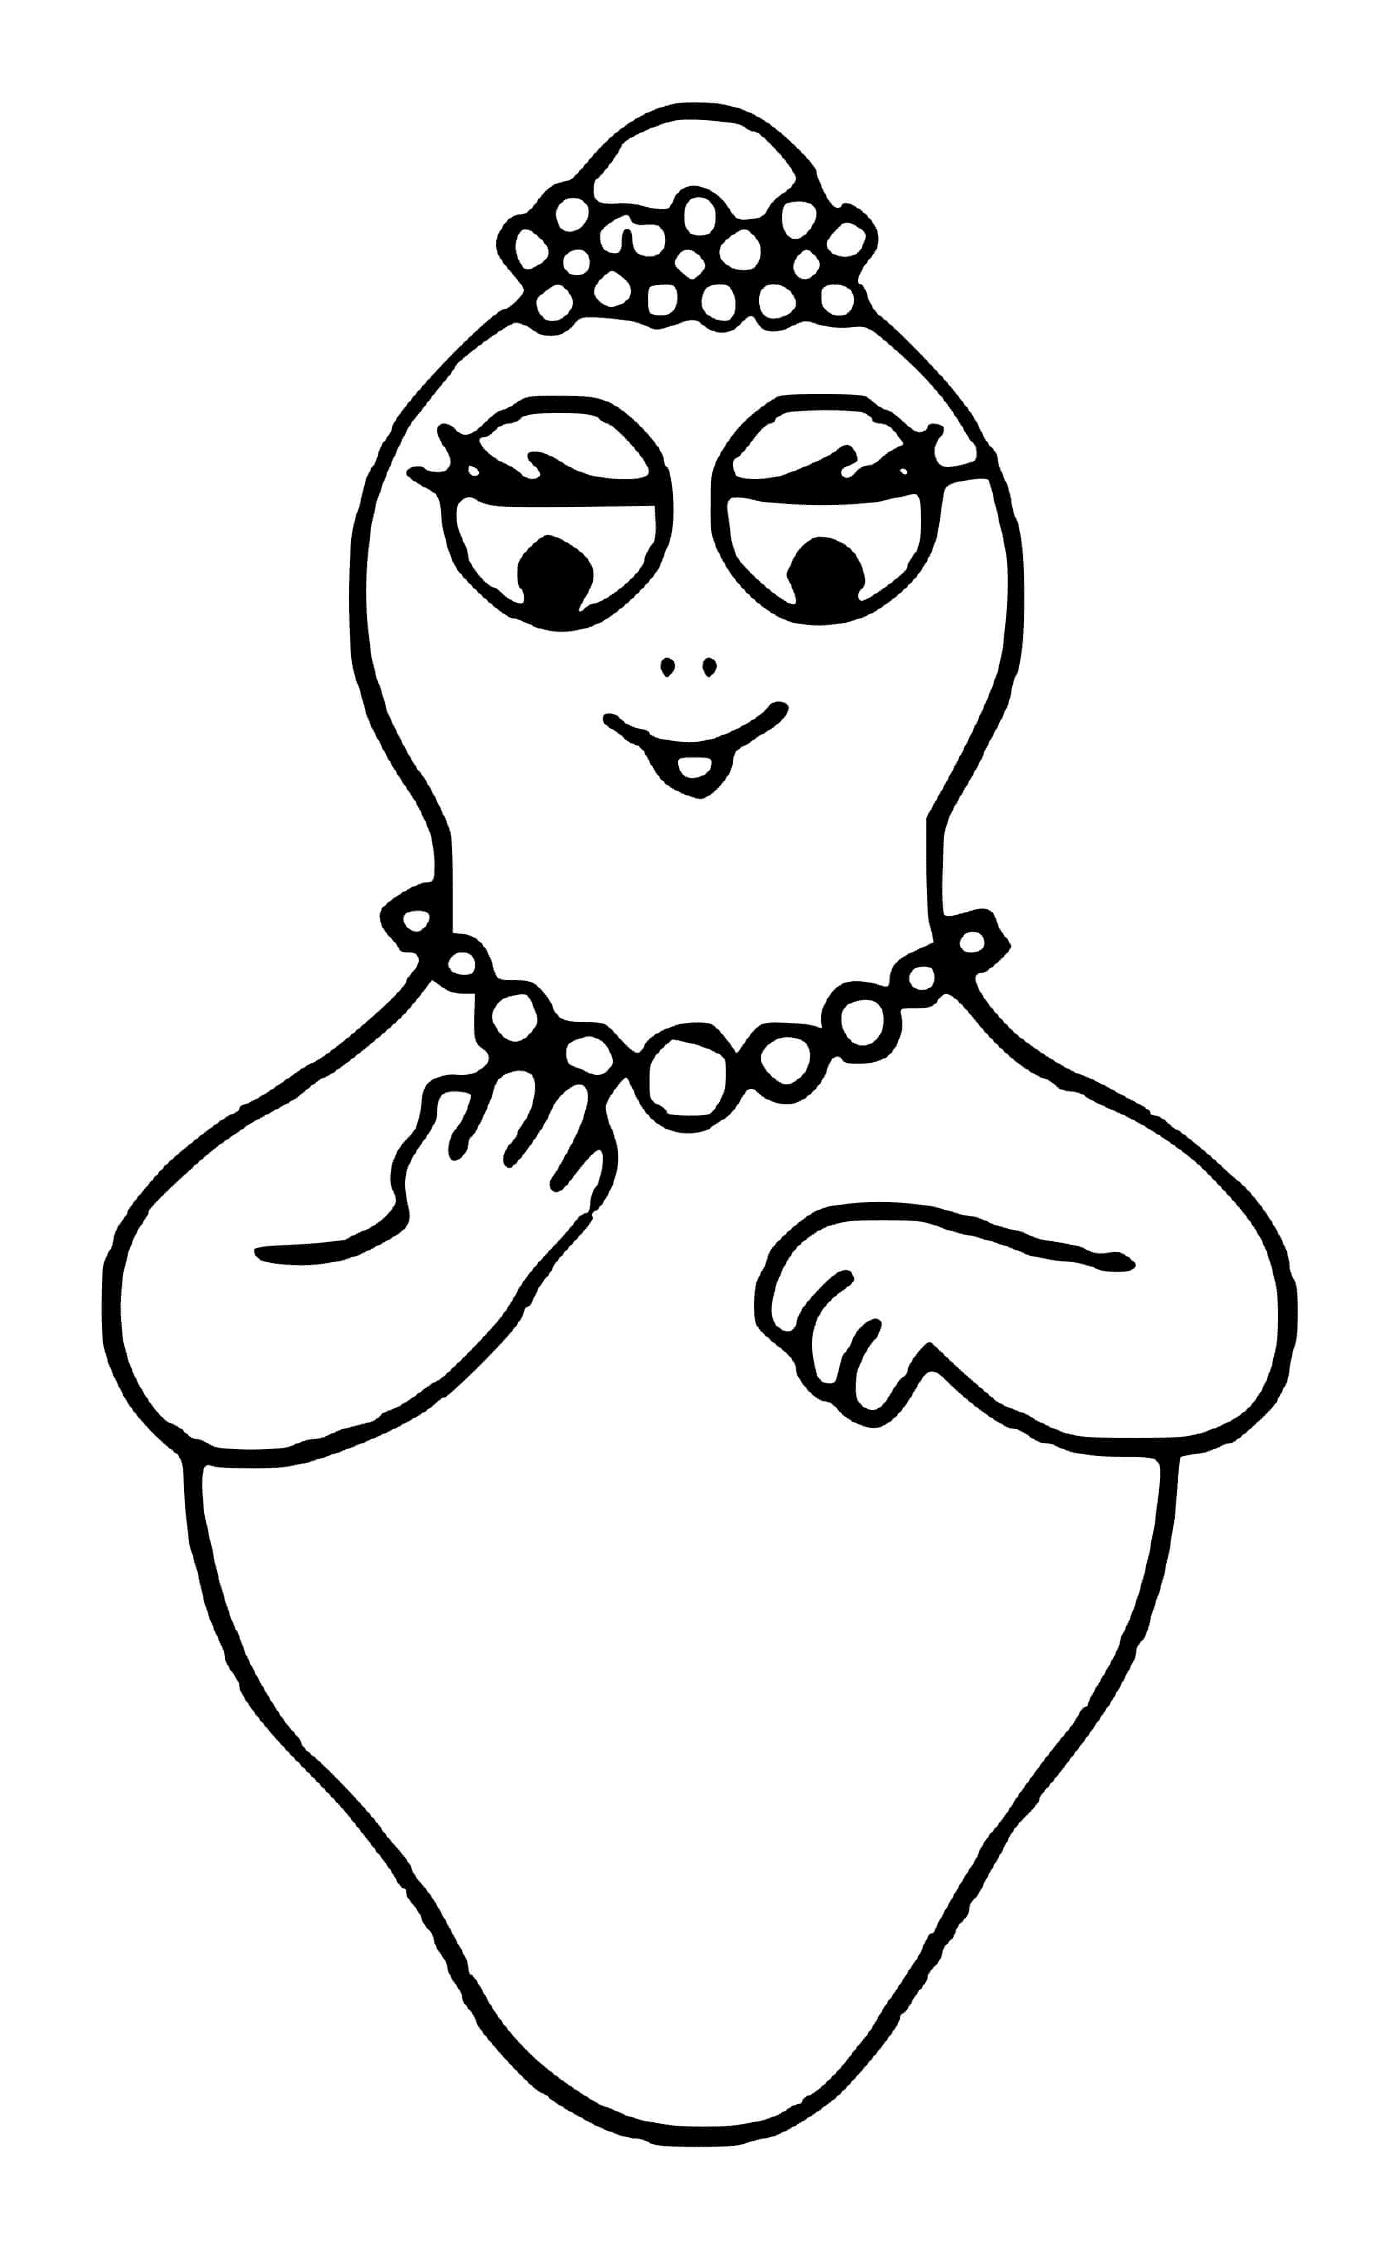  A person holding a necklace 